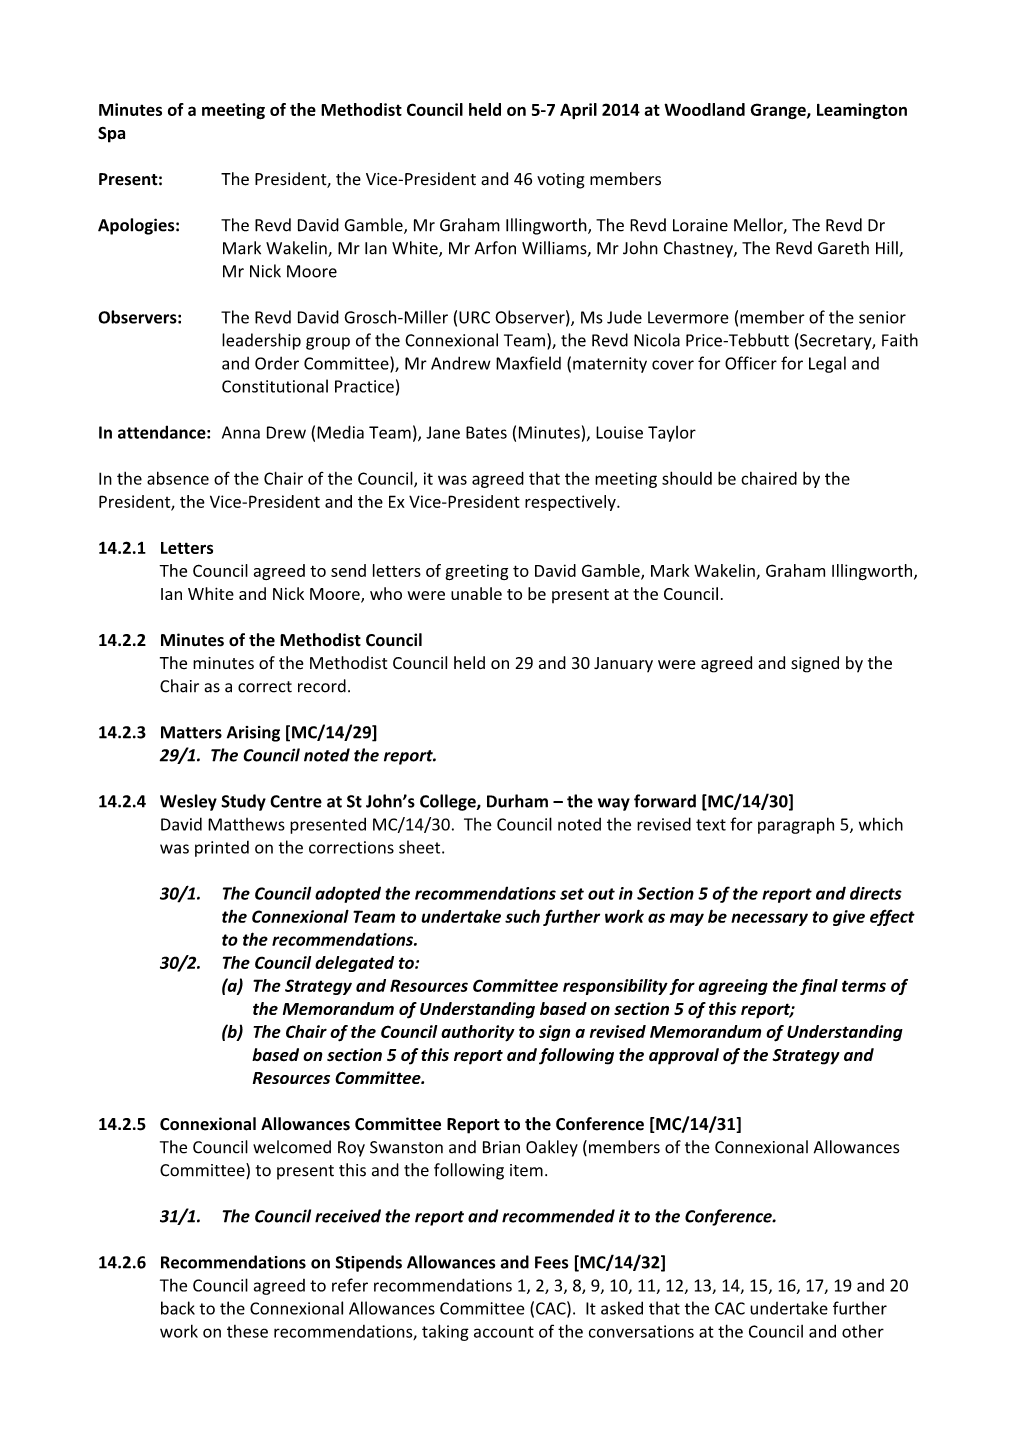 Minutes of a Meeting of the Methodist Council Held on 5-7 April 2014 at Woodland Grange